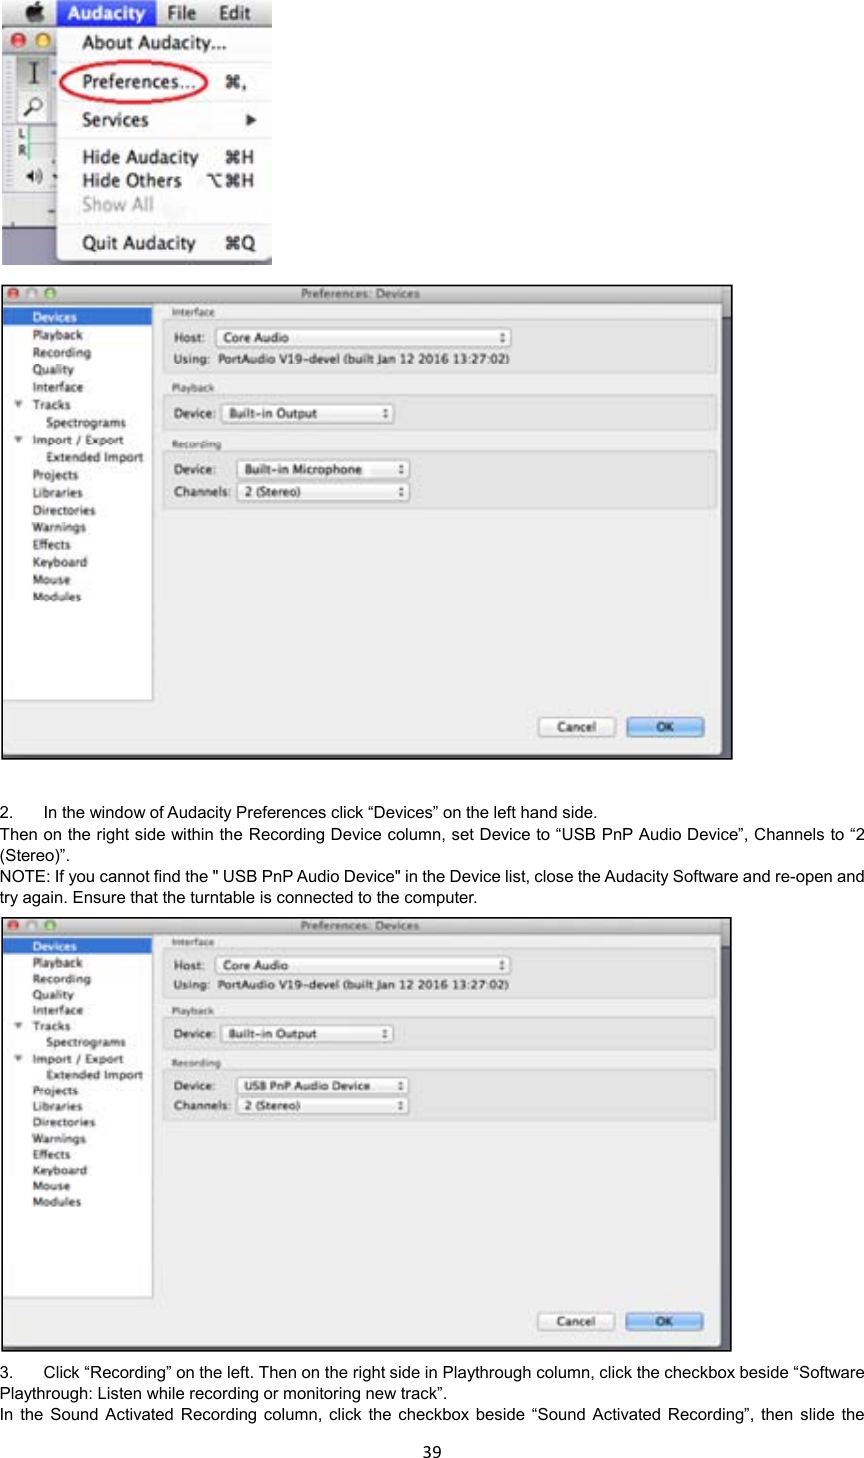 39       2.  In the window of Audacity Preferences click “Devices” on the left hand side.   Then on the right side within the Recording Device column, set Device to “USB PnP Audio Device”, Channels to “2 (Stereo)”. NOTE: If you cannot find the &quot; USB PnP Audio Device&quot; in the Device list, close the Audacity Software and re-open and try again. Ensure that the turntable is connected to the computer.  3.  Click “Recording” on the left. Then on the right side in Playthrough column, click the checkbox beside “Software Playthrough: Listen while recording or monitoring new track”. In  the  Sound  Activated Recording  column,  click  the checkbox  beside “Sound  Activated Recording”,  then  slide  the 